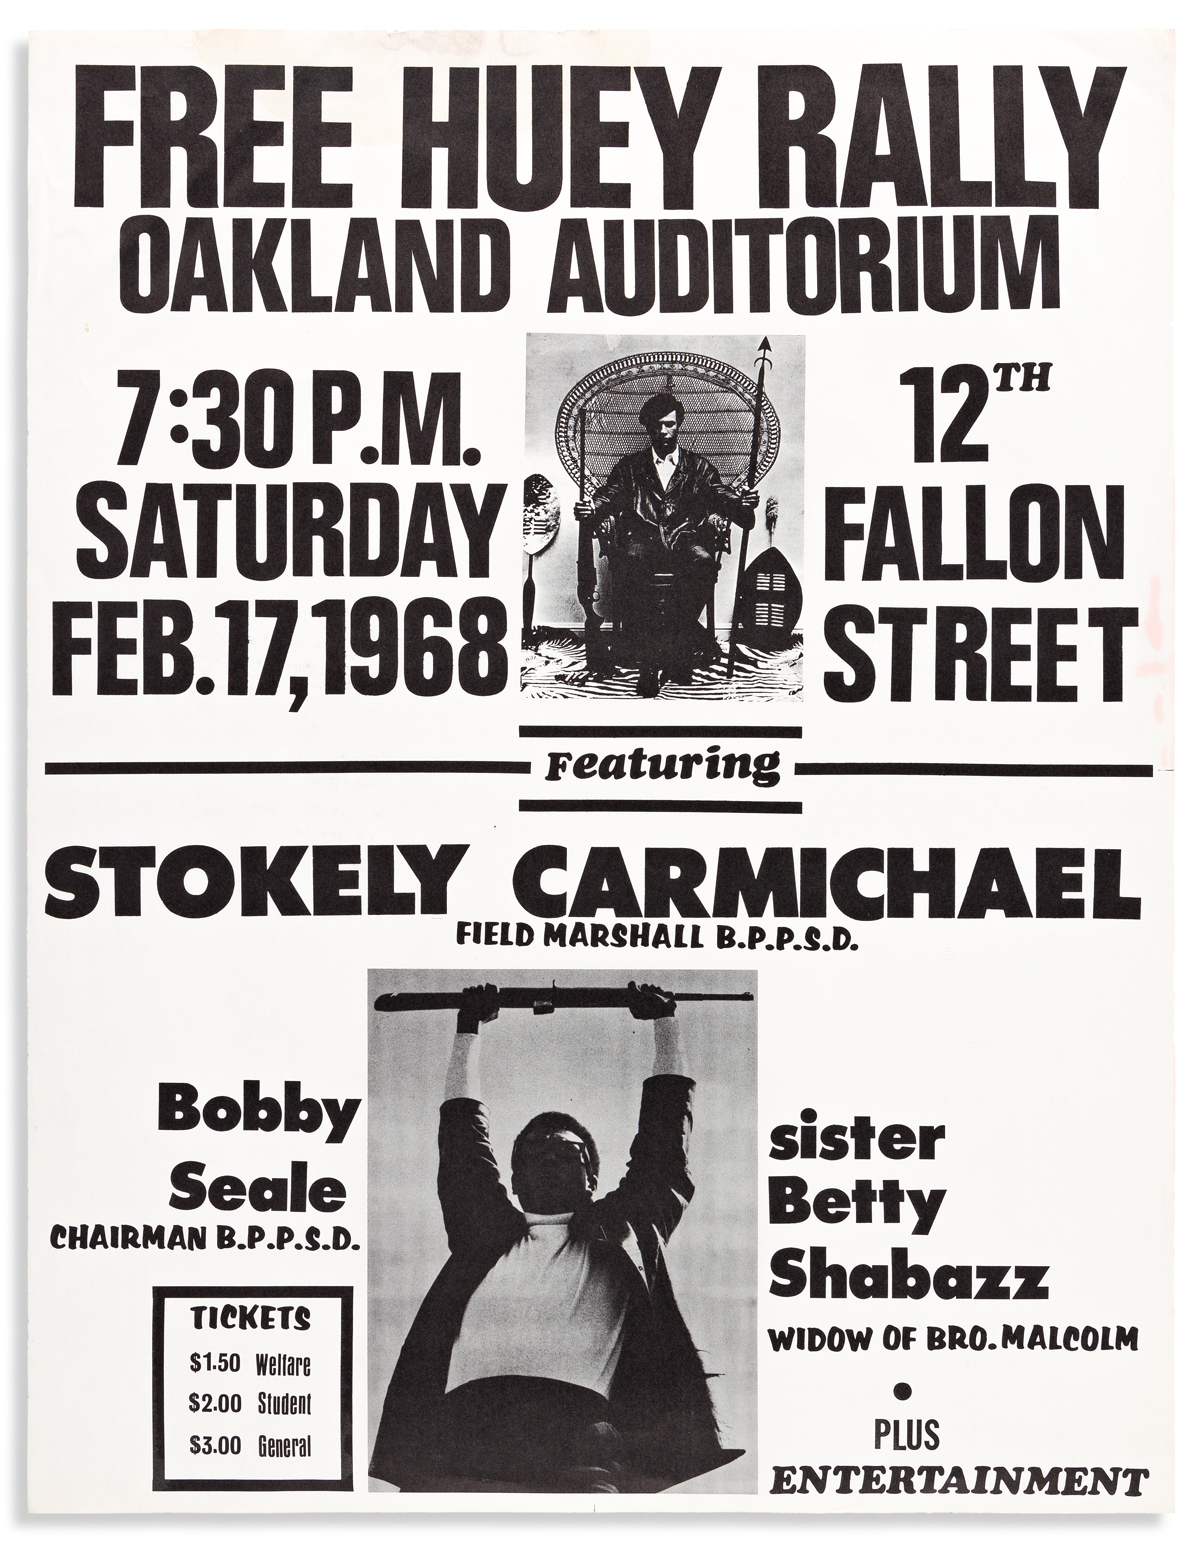 (BLACK PANTHERS.) Free Huey Rally, Oakland Auditorium . . . Featuring Stokely Carmichael.